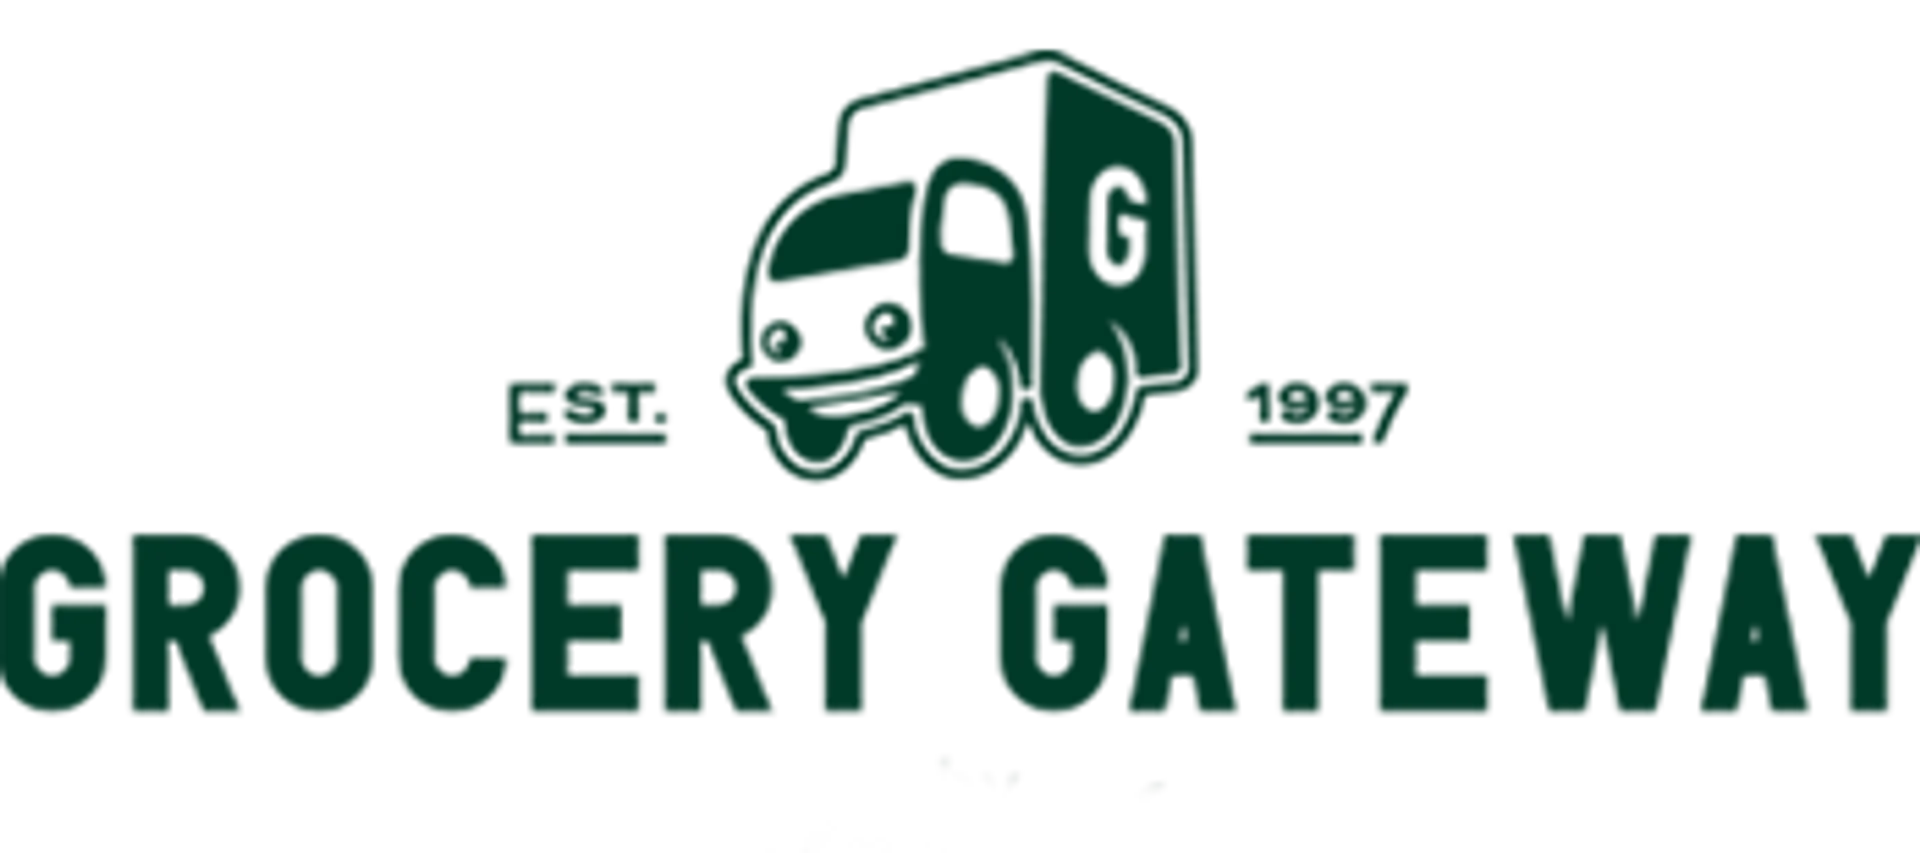 GROCERY GATEWAY logo. Current weekly ad